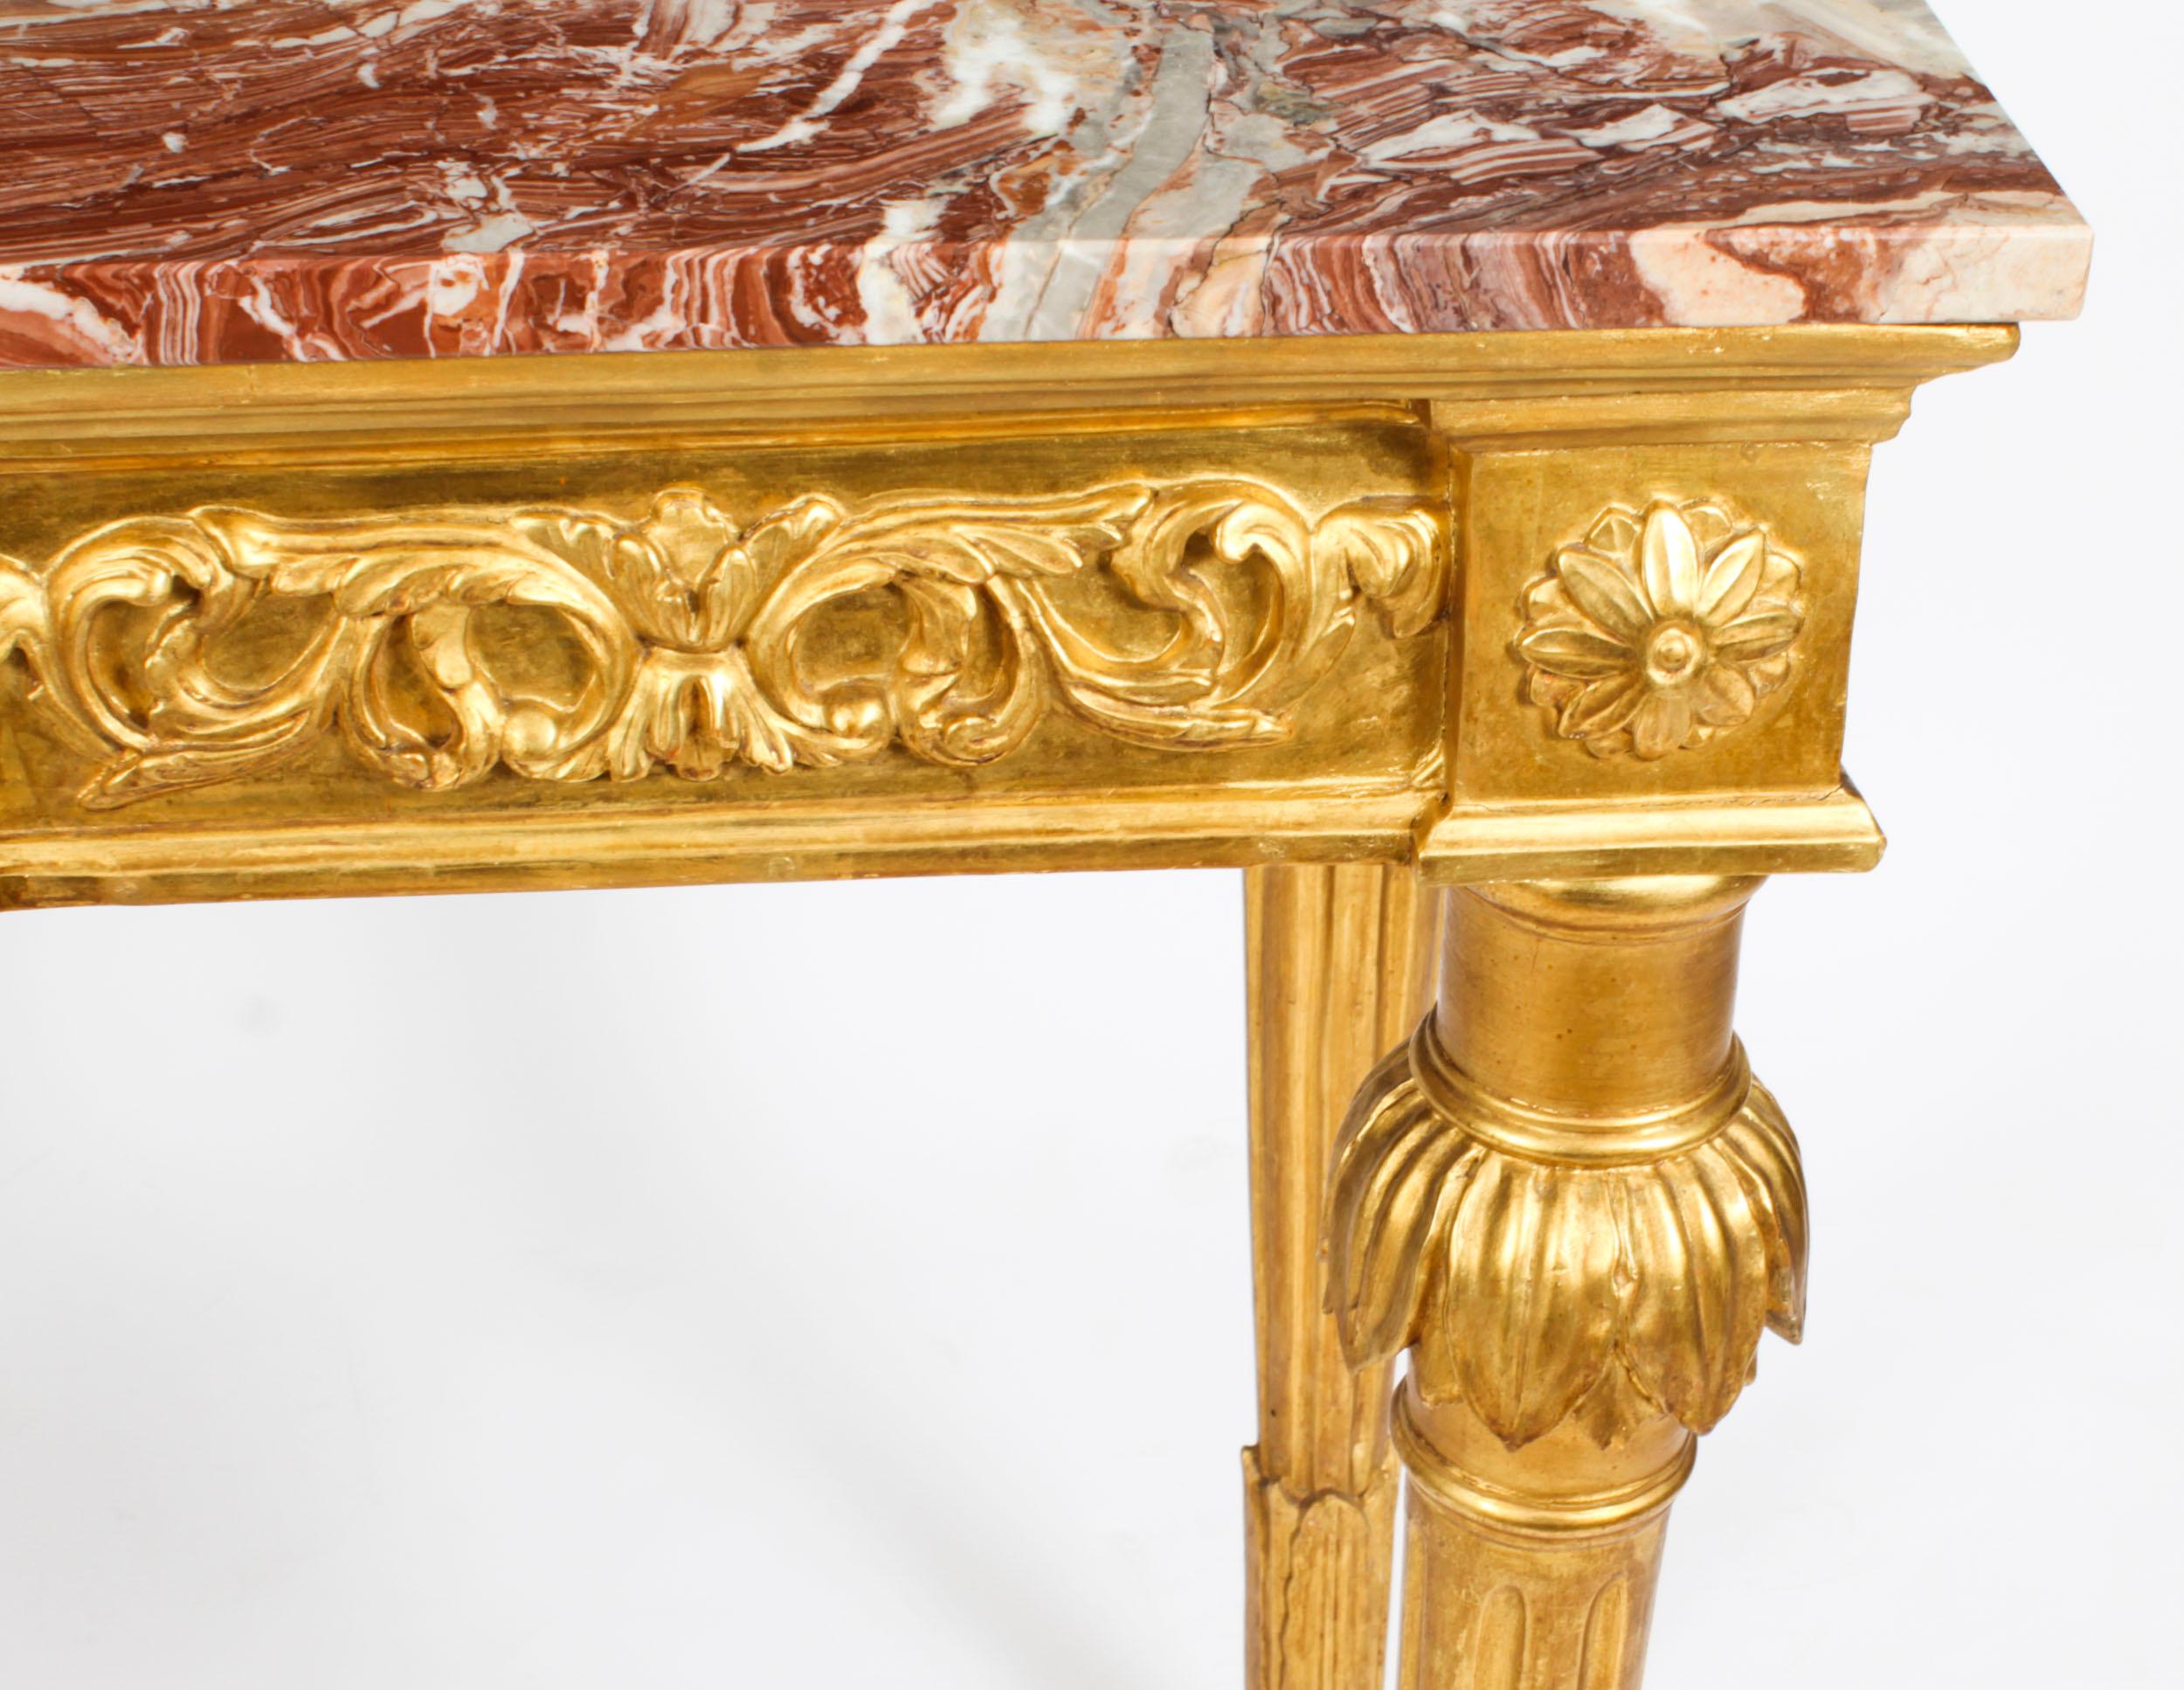 Antique Louis XV Revival Carved Giltwood Console Pier Table, 19th Century For Sale 4